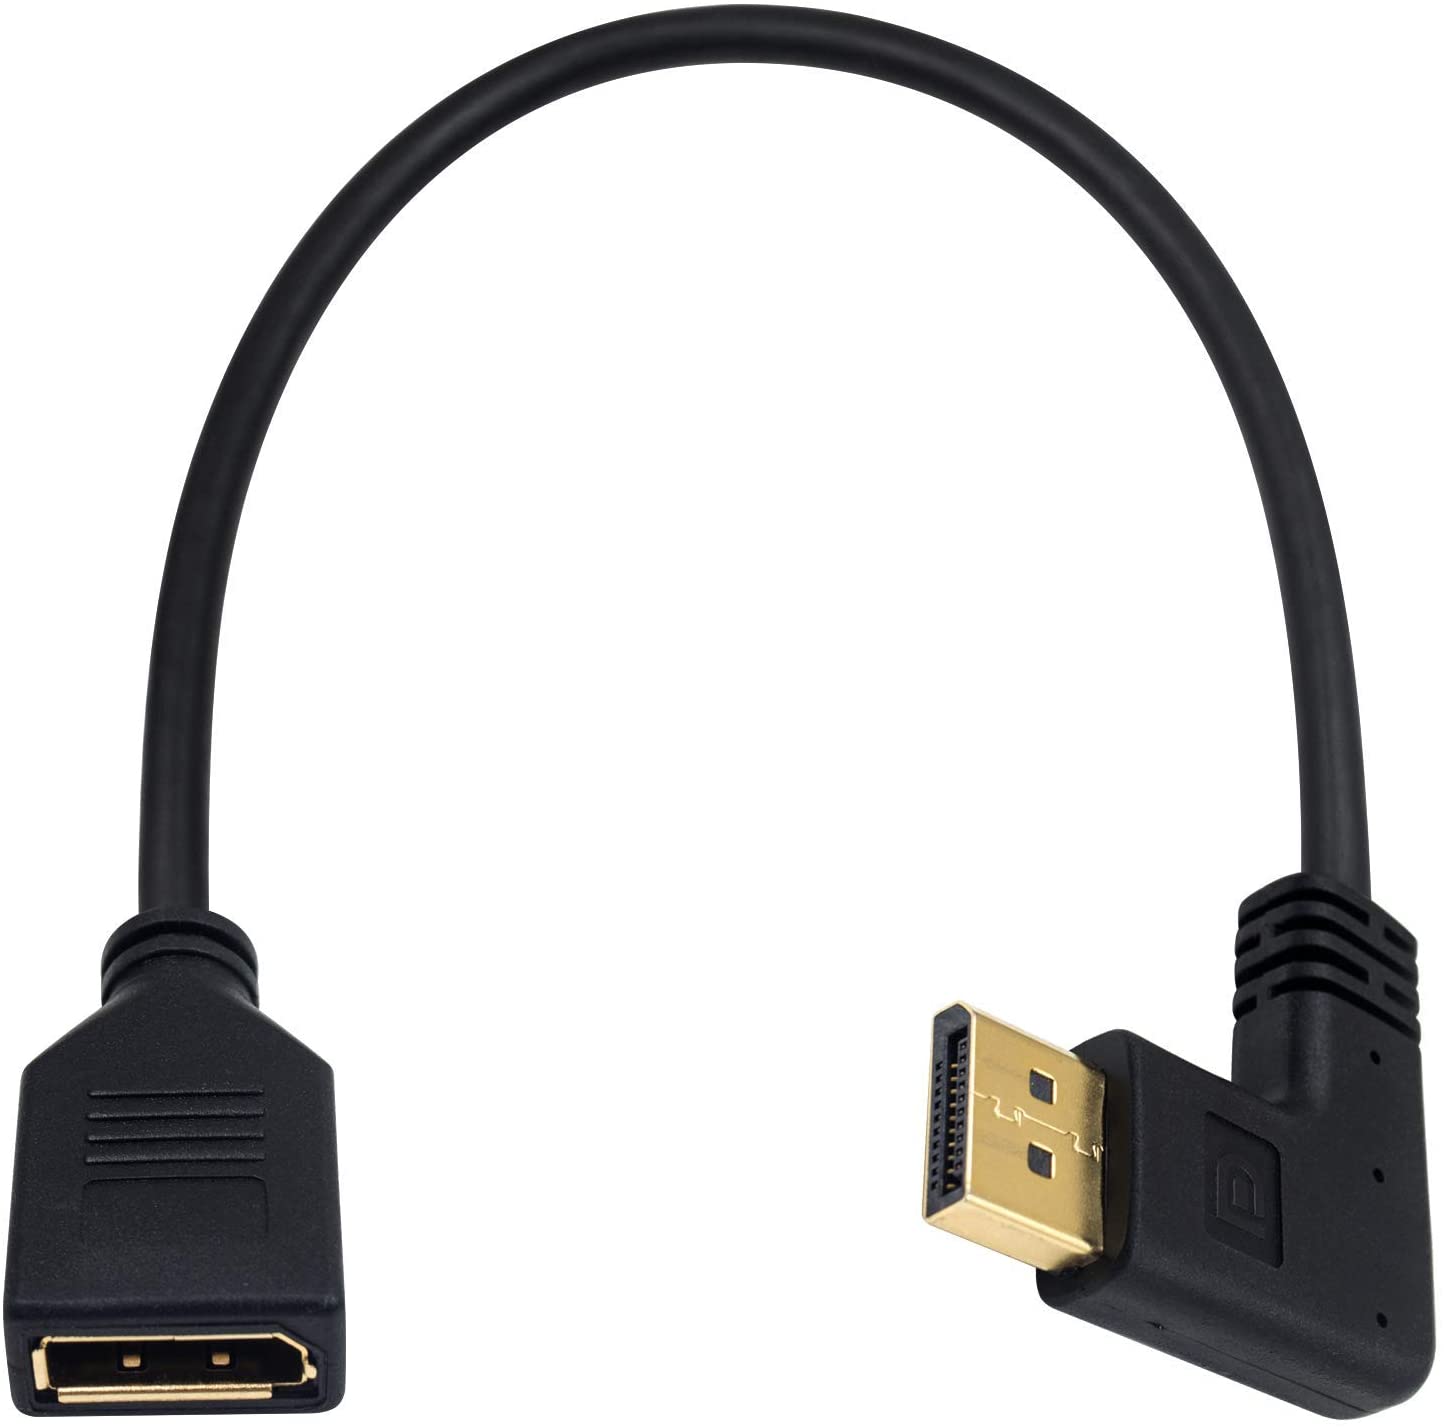 DisplayPort Male to Female Extension Cable 0.3m